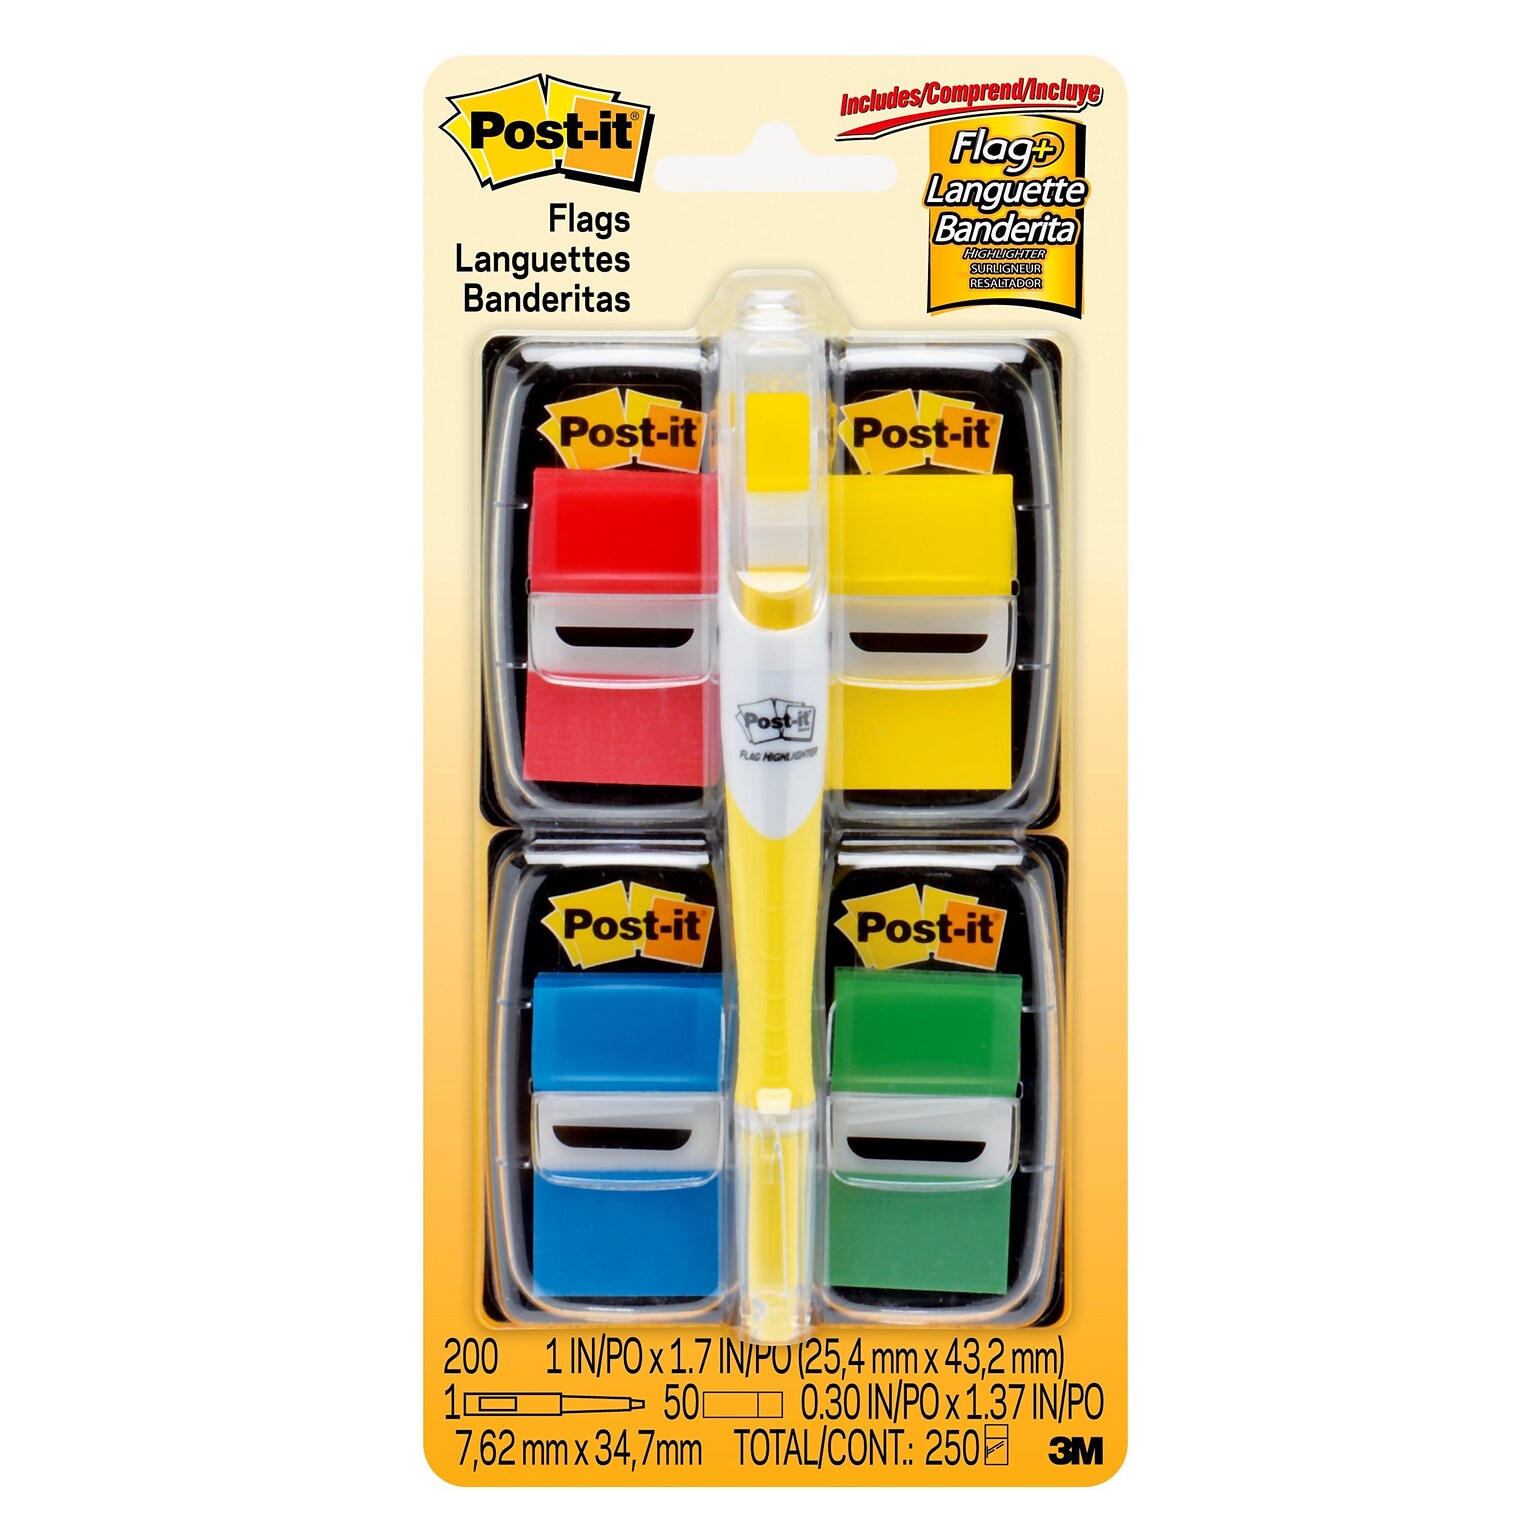 Post-it Flags Value Pack, .94 Wide, Assorted Colors, 200 Flags/Pack plus Flag + Highlighter (680-RYBGVA)